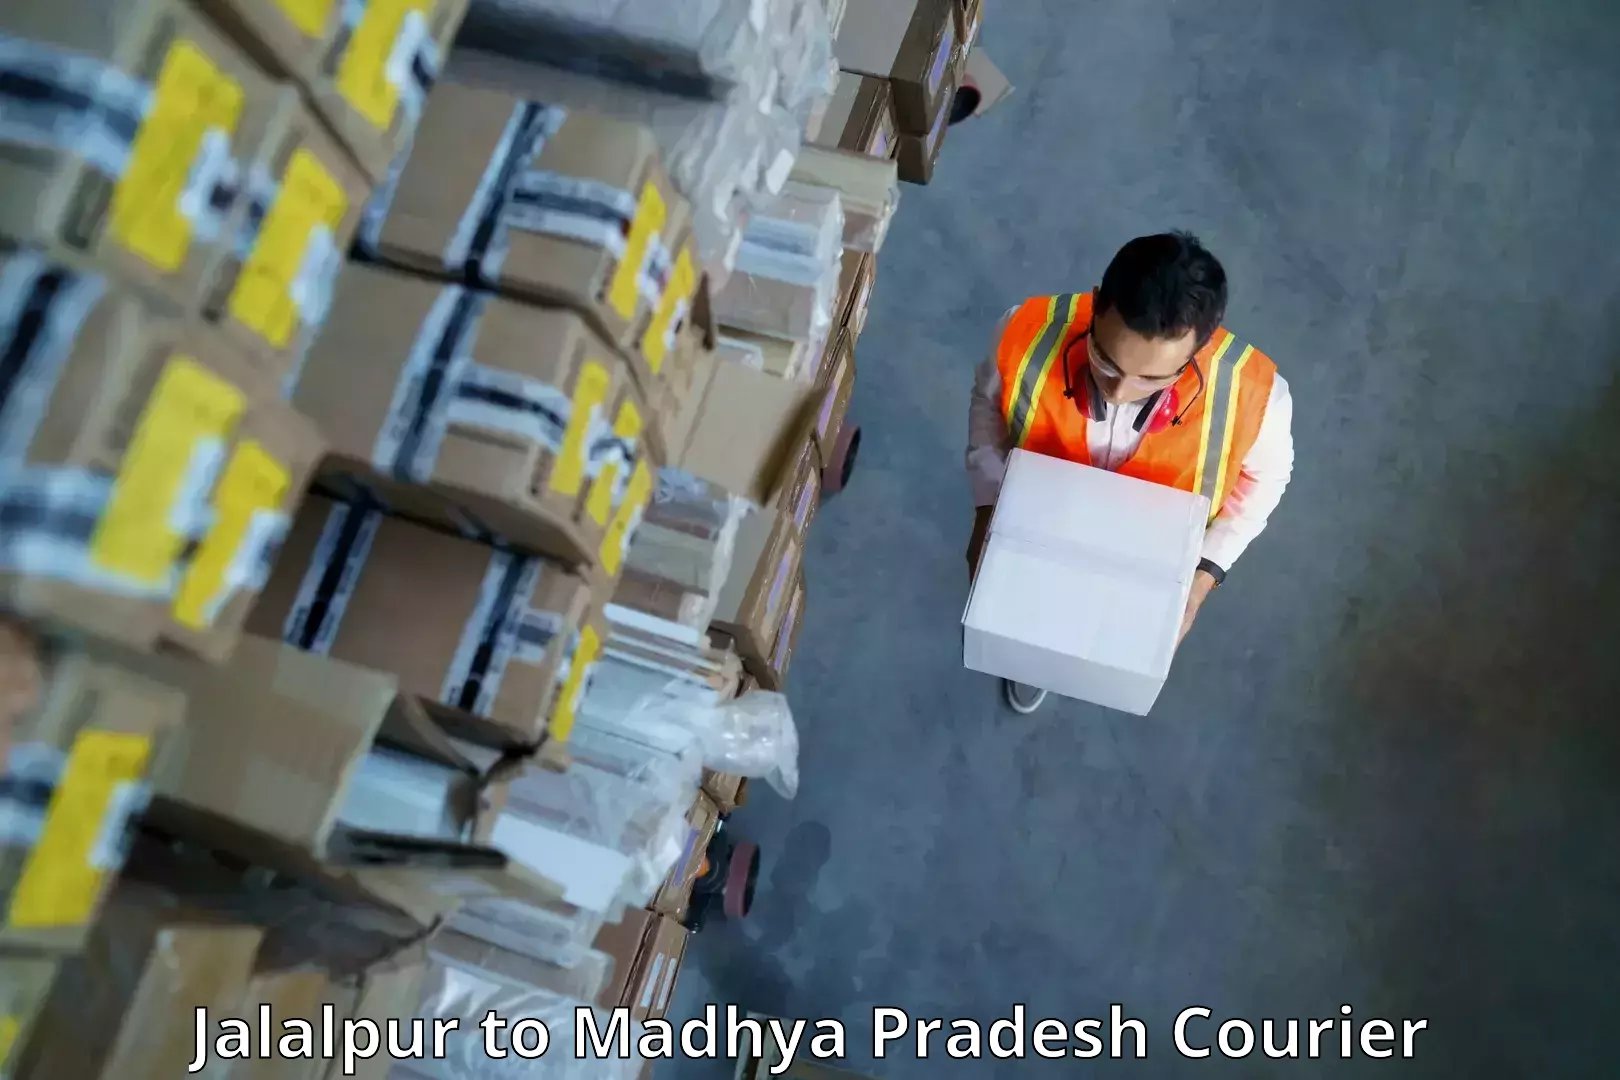 Courier insurance in Jalalpur to Harda